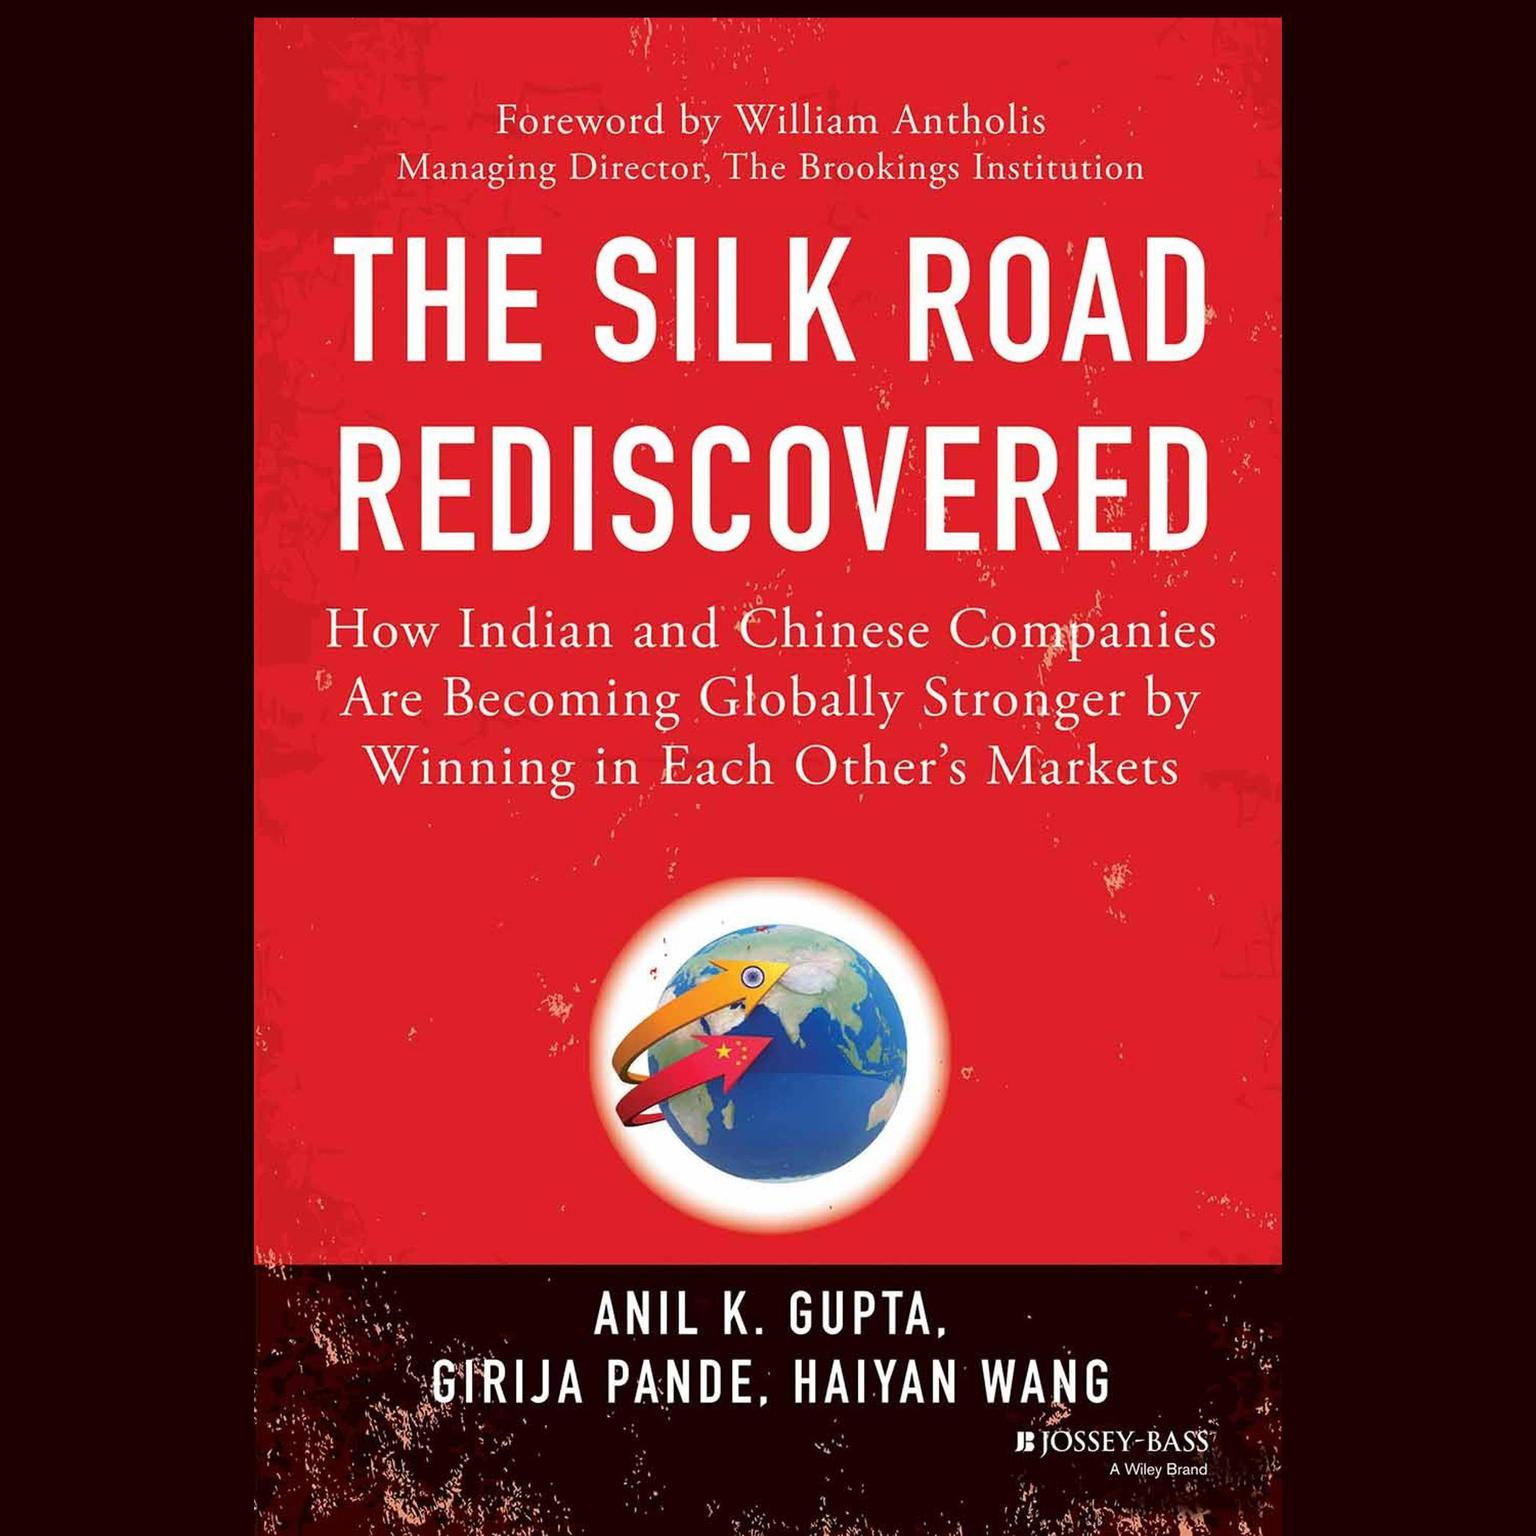 The Silk Road Rediscovered: How Indian and Chinese Companies Are Becoming Globally Stronger by Winning in Each Others Markets Audiobook, by Anil K. Gupta